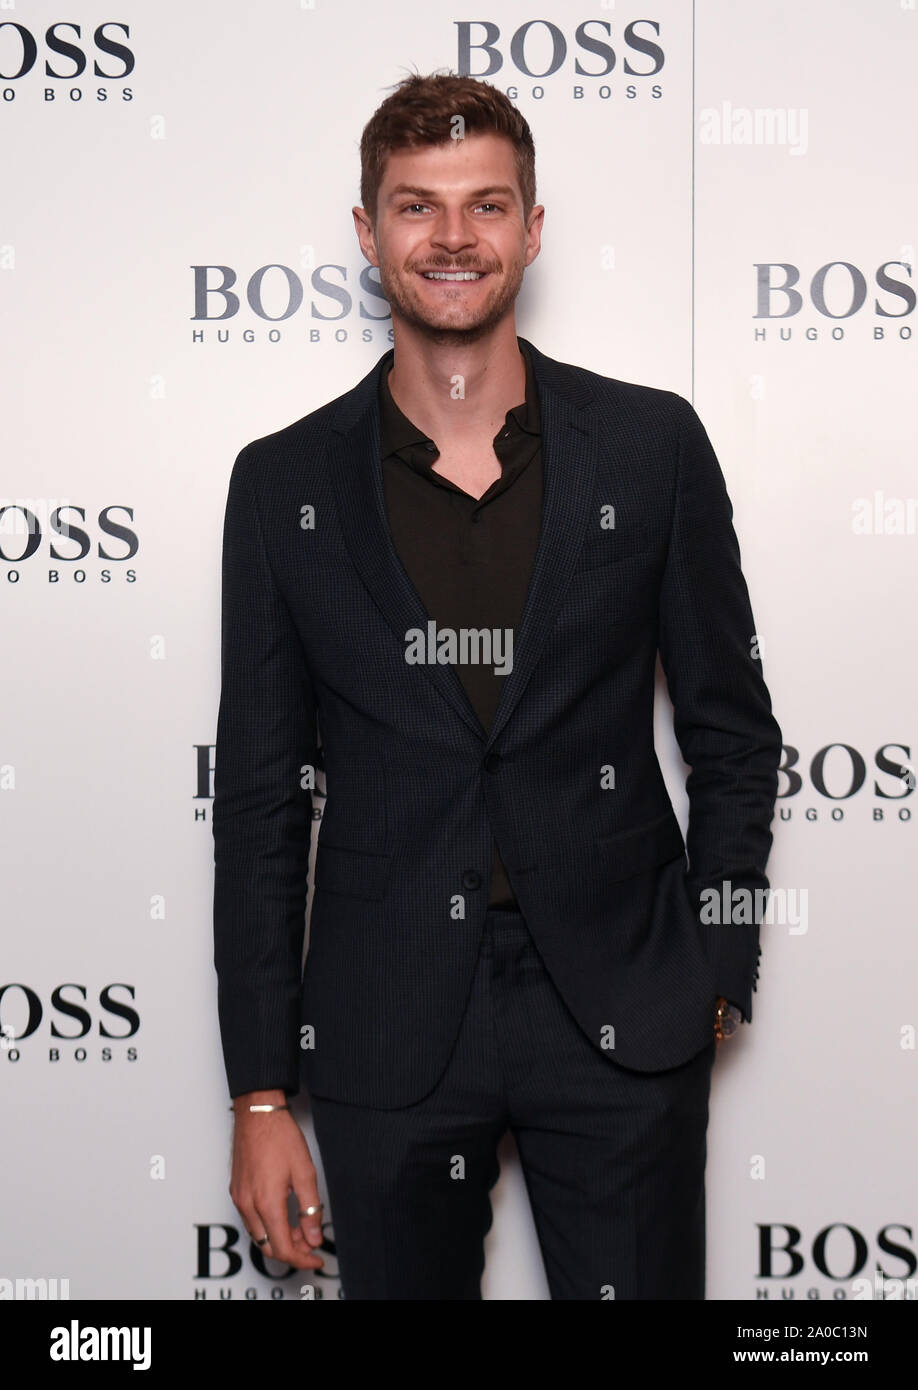 Jim Chapman attending the christening ceremony for the Hugo Boss yacht in London. Stock Photo